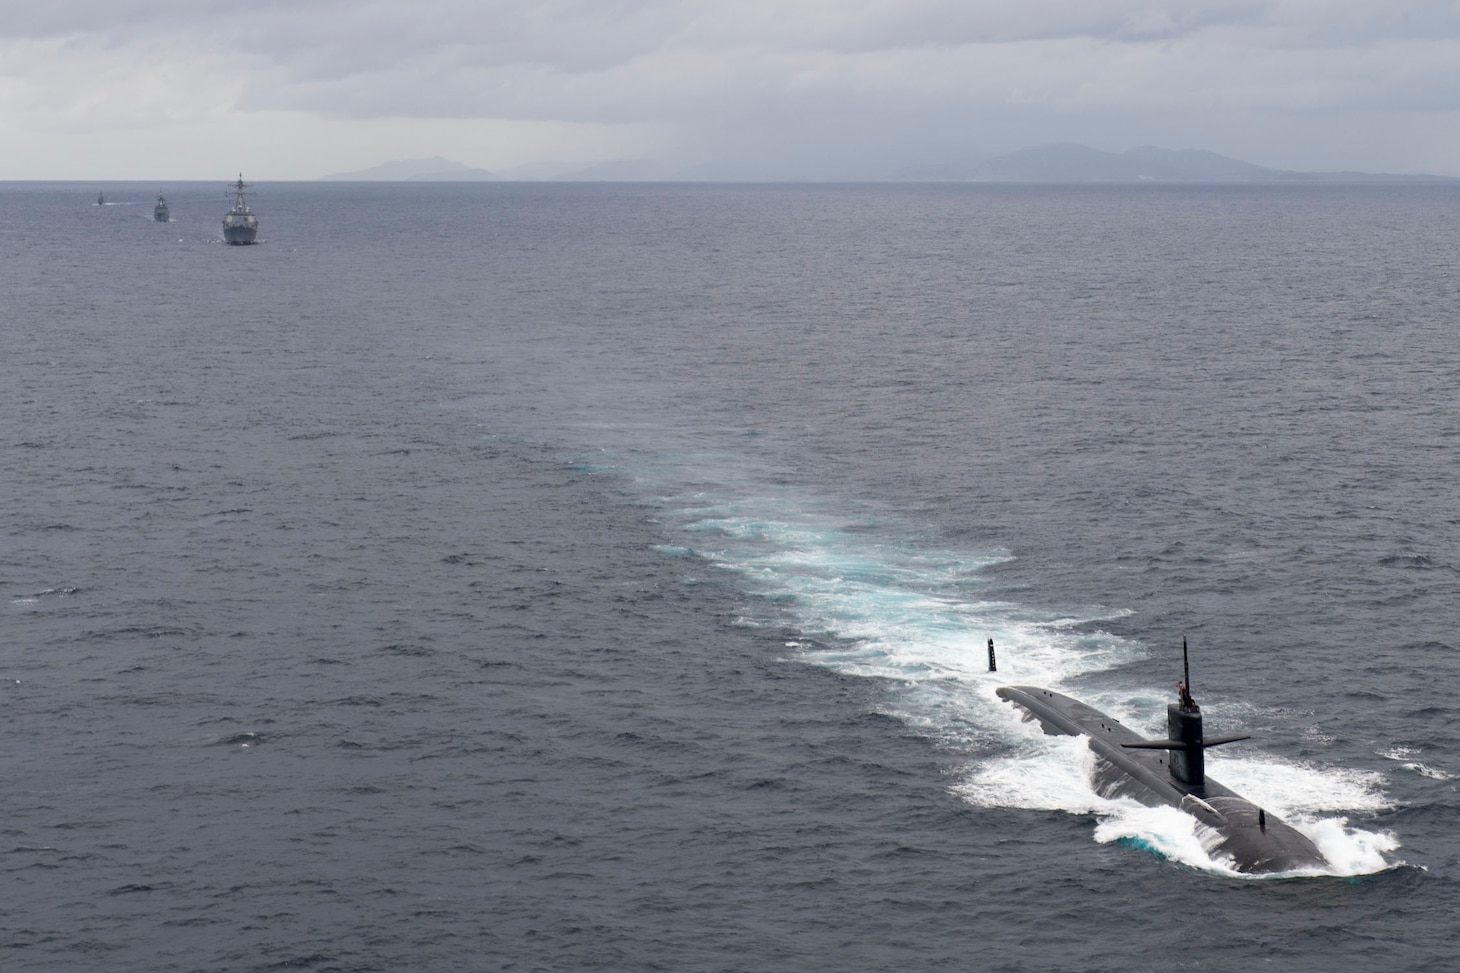 The Los Angeles-class fast attack submarine USS Key West (SSN 722), the Arleigh Burke-class guided-missile destroyer USS Sterett (DDG 104), and the Royal Thai Navy frigate HTMS Naresuan (FFG 421) and the corvette HTMS Long Lom (FS 533) conduct a transit exercise as part of Exercise Guardian Sea 2017. Sterett is part of the Sterett-Dewey Surface Action Group and is the third deploying group operating under the command and control construct called 3rd Fleet Forward. U.S. 3rd Fleet operating forward offers additional options to the Pacific Fleet commander by leveraging the capabilities of 3rd and 7th Fleets. 